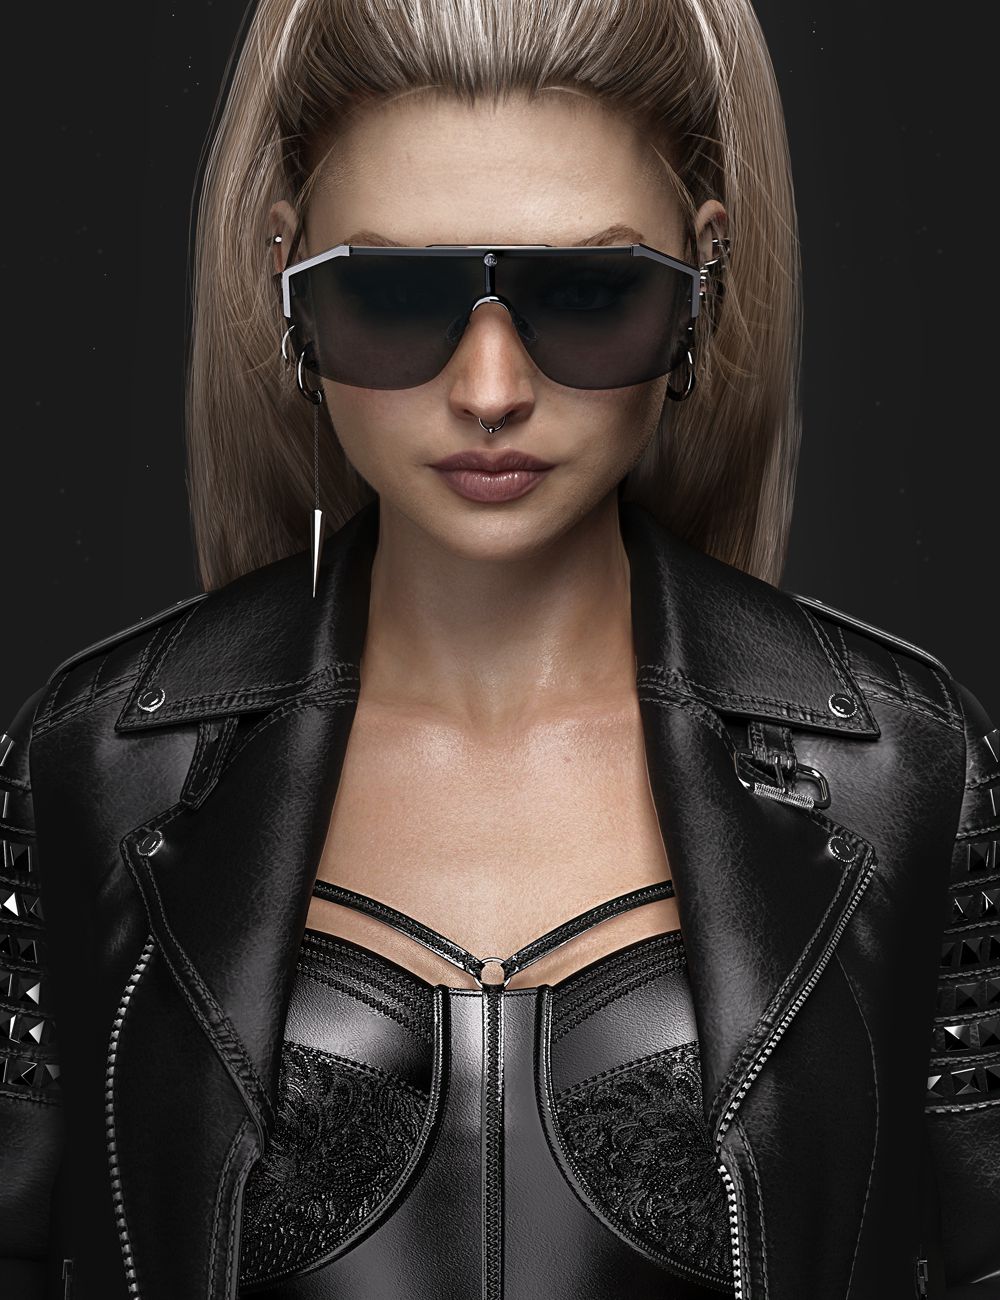 AJC Glamor Biker Outfit Sunglasses for Genesis 8 and 8.1 Females by: adeilsonjc, 3D Models by Daz 3D